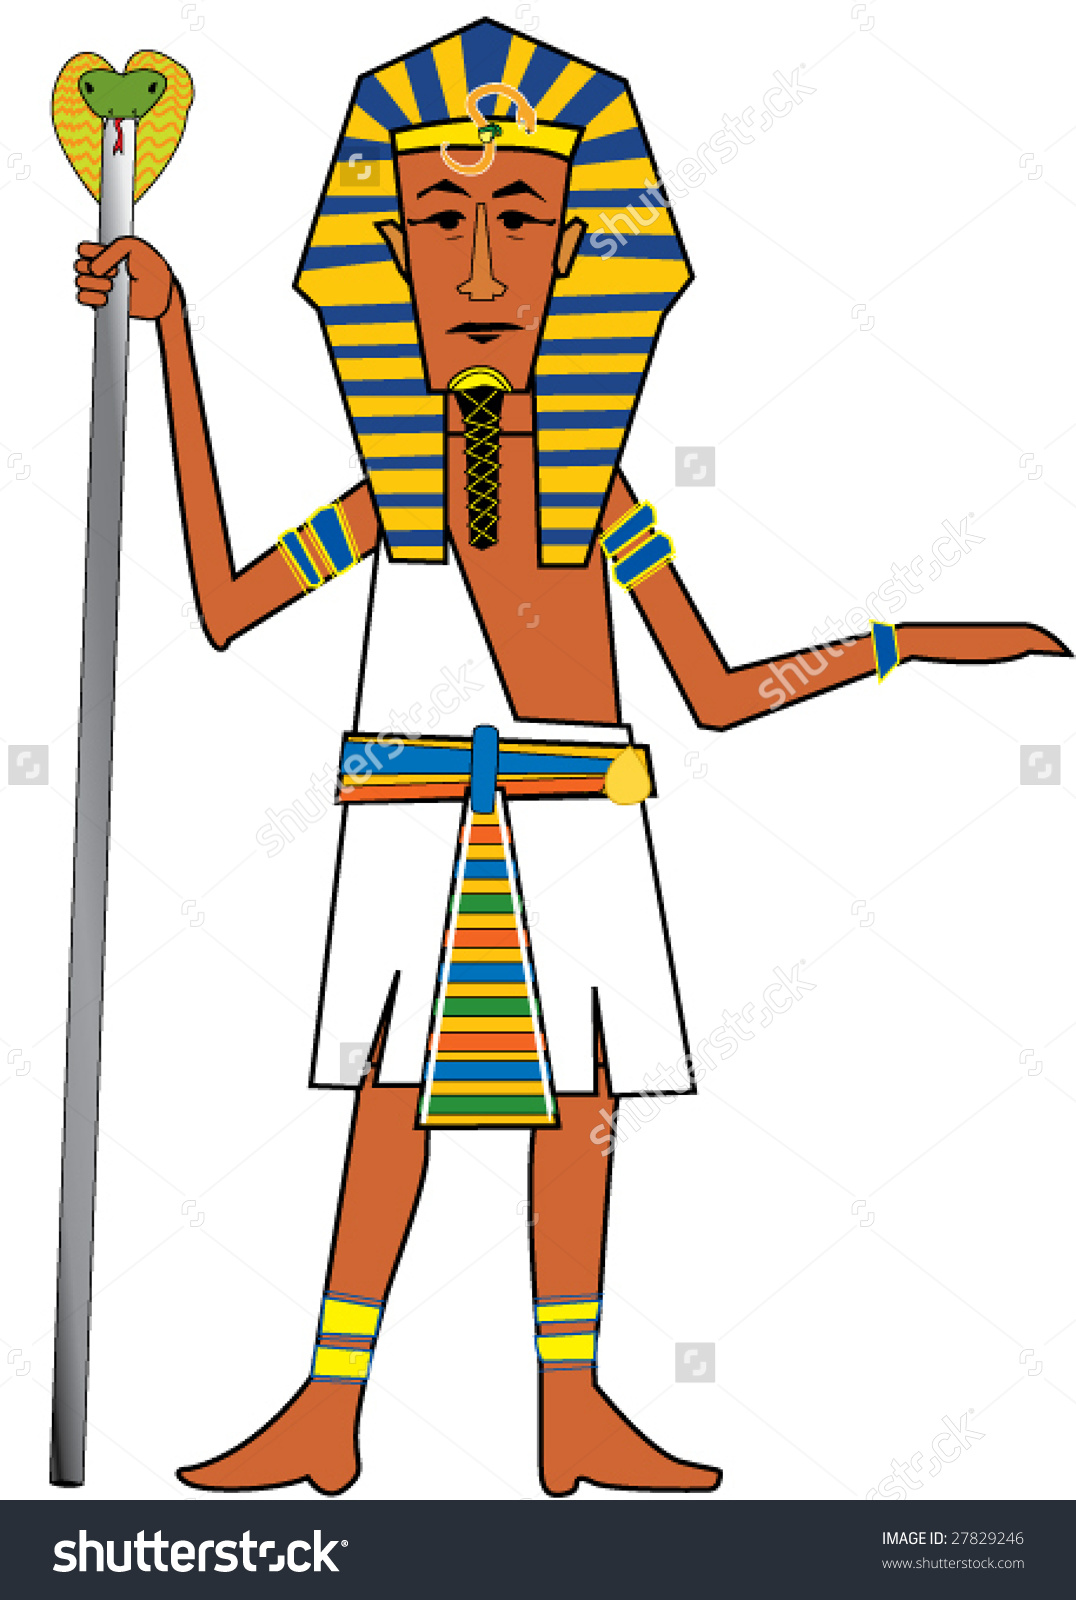 moses clipart egypt king